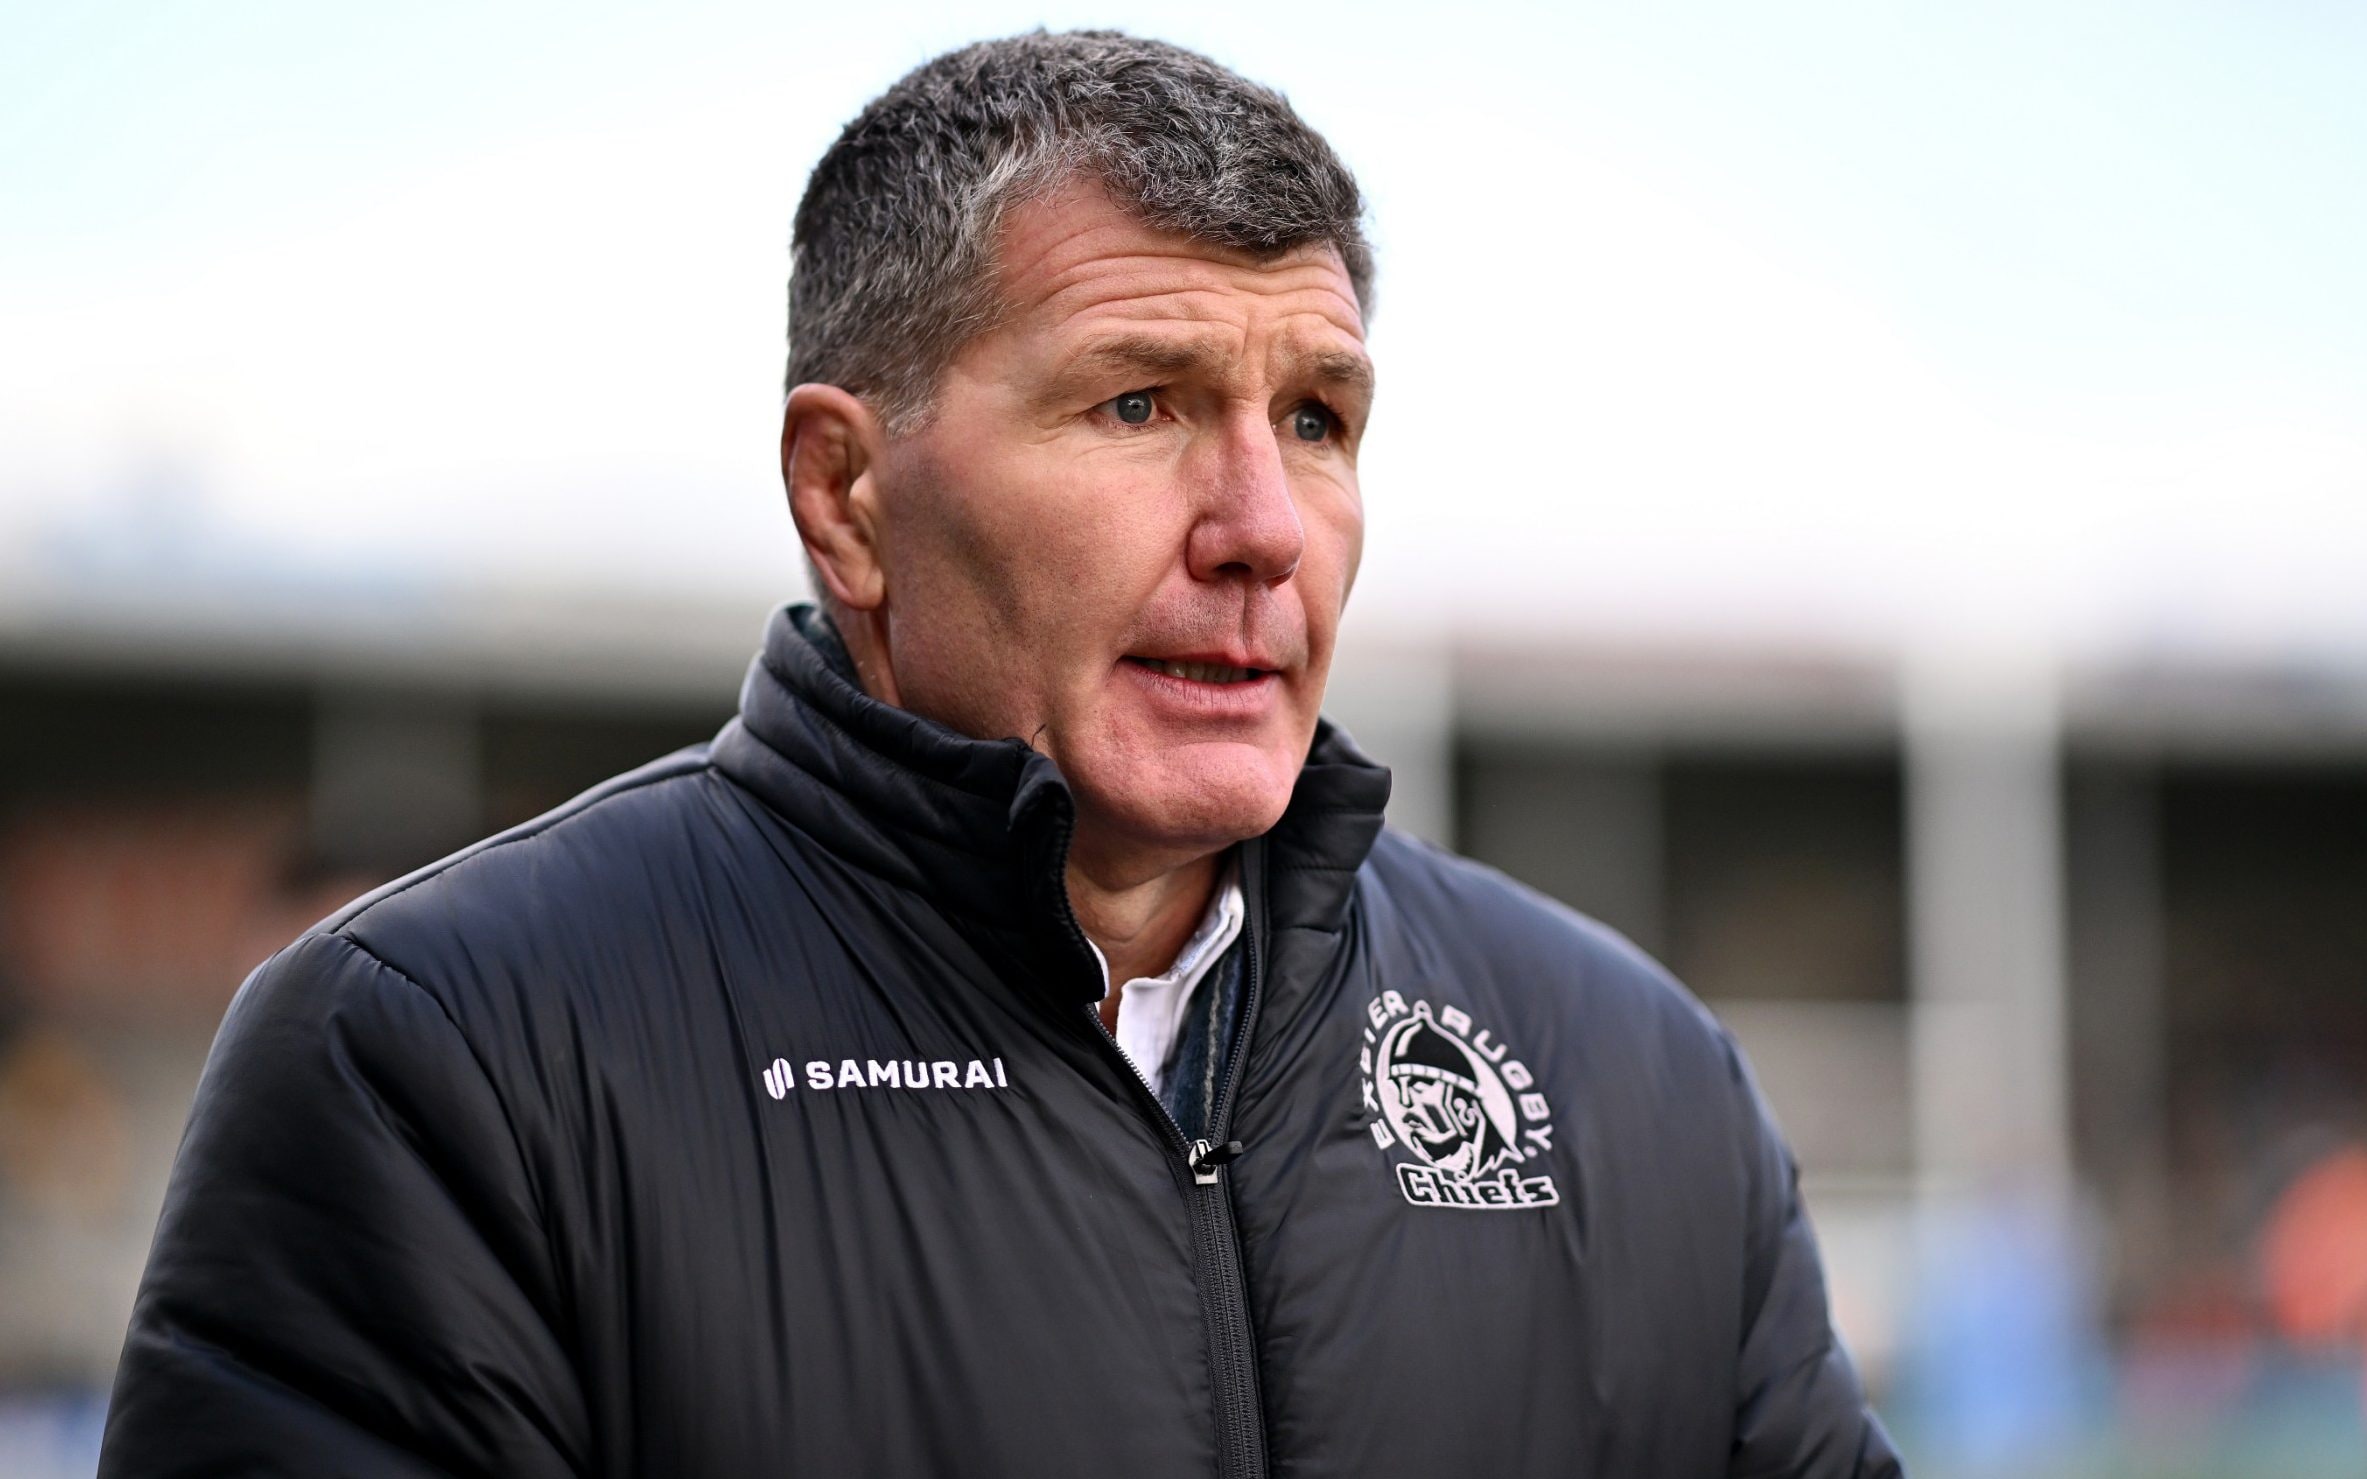 jordie barrett signing shows premiership ‘not in place to rival urc financially’, says rob baxter